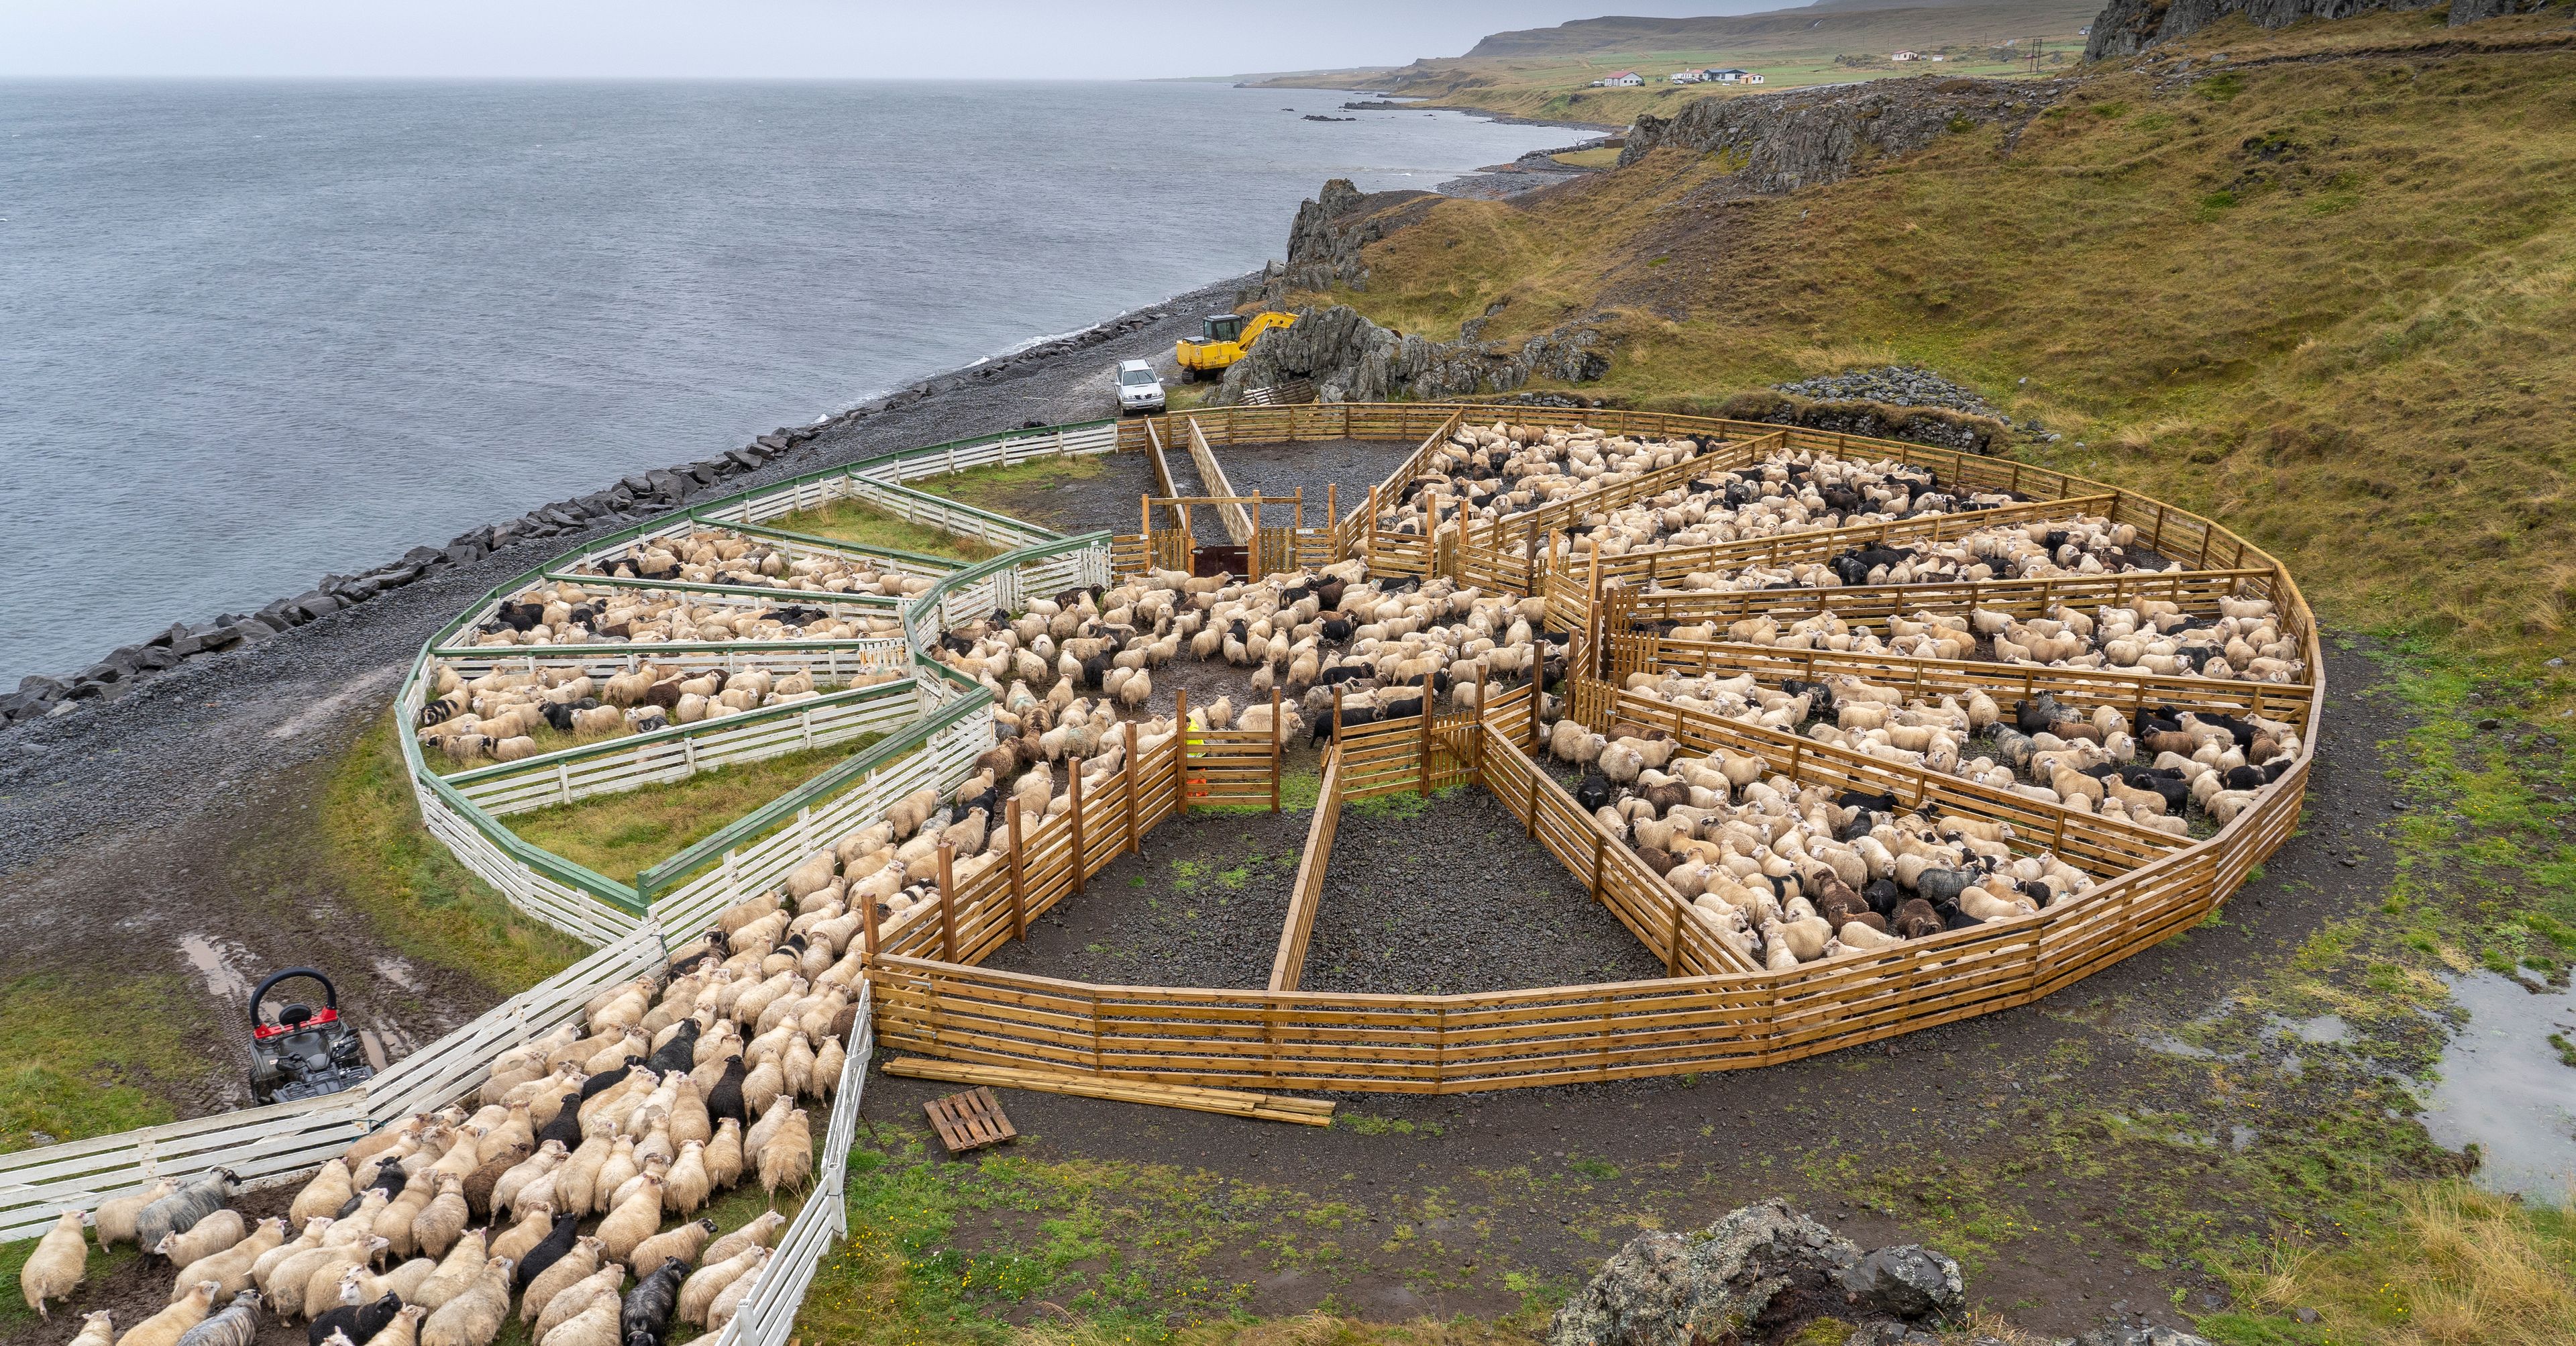 Icelandic sheep's in a Round-Up in Iceland